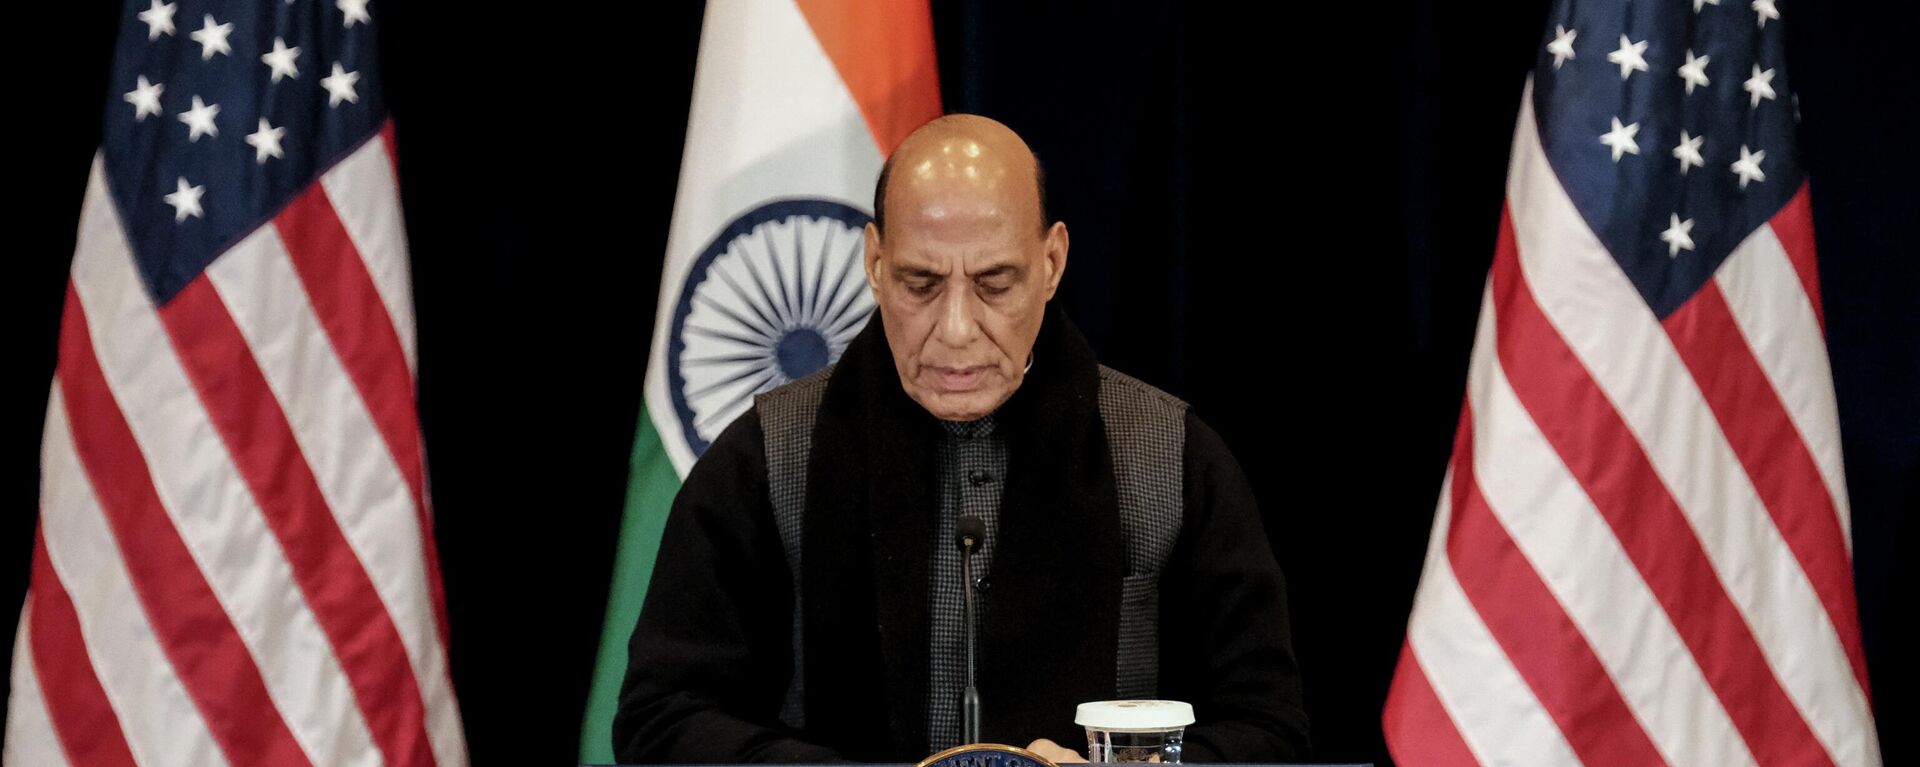 India’s Defense Minister Rajnath Singh participates in a joint news conference during the fourth US-India 2+2 Ministerial Dialogue at the State Department in Washington, DC, on April 11, 2022. - Sputnik International, 1920, 16.04.2022